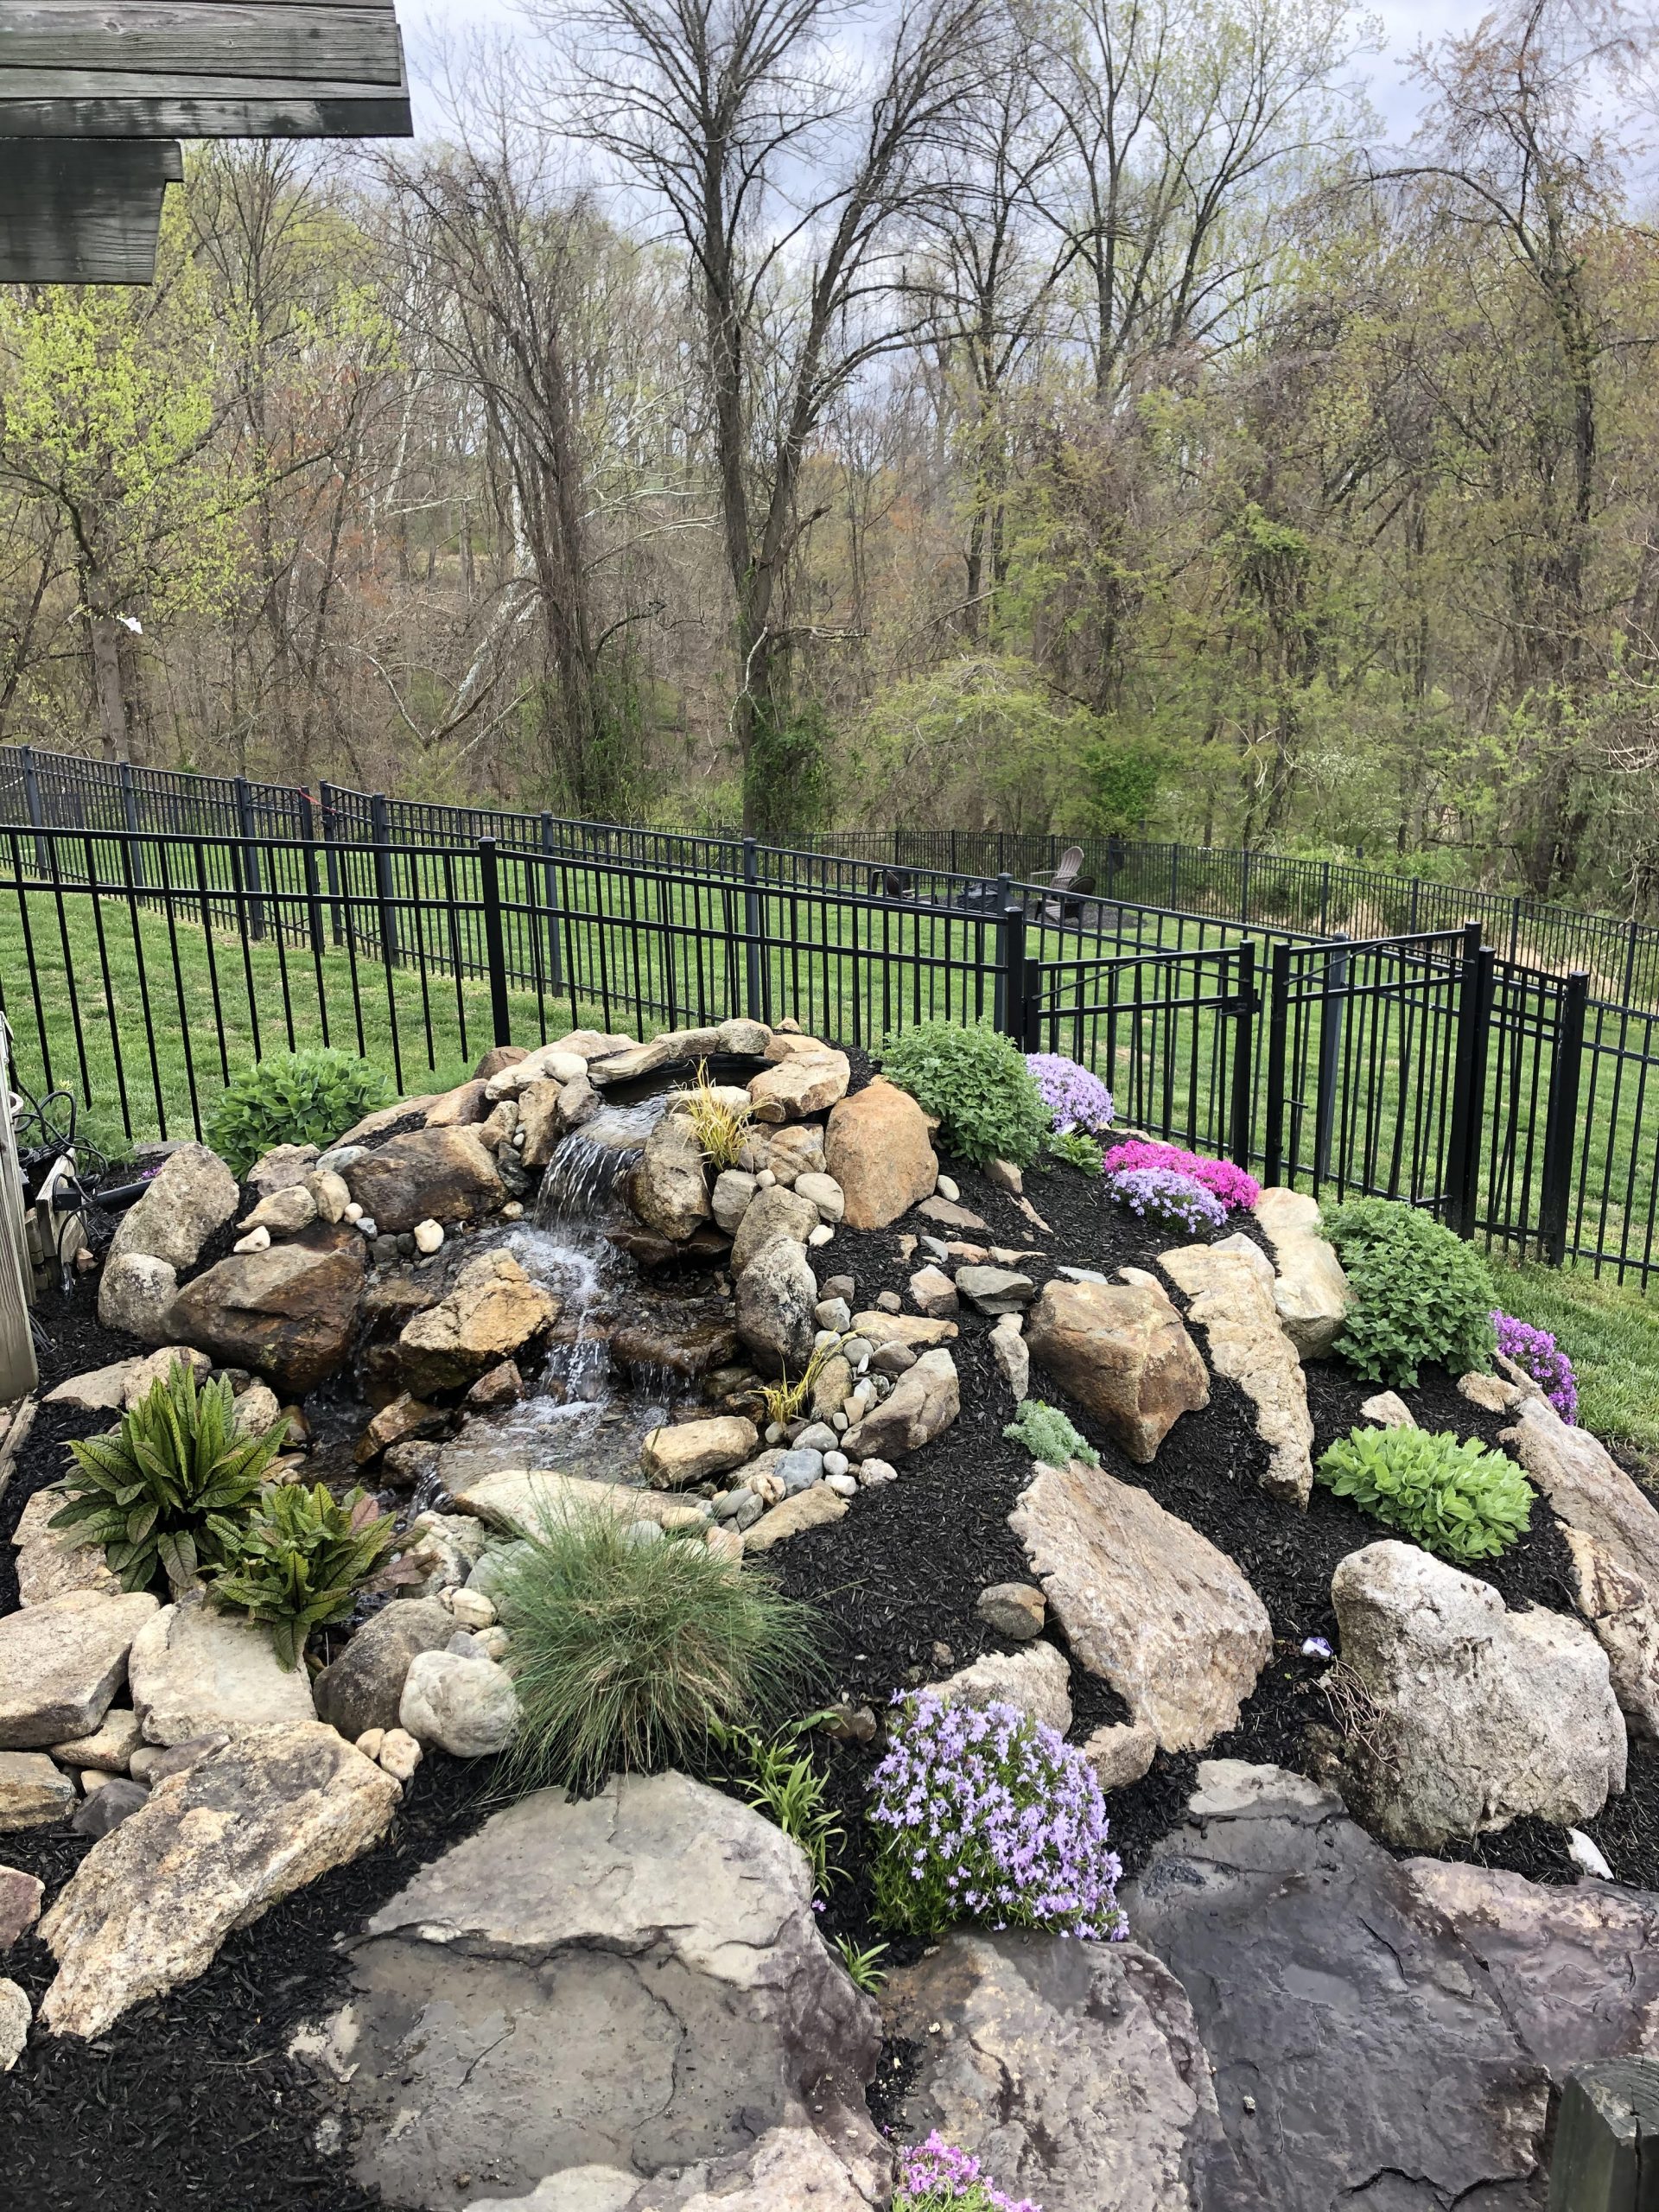 King of Prussia, PA Residential & Commercial Landscaping Services, Residential Landscaping Contractor & Commercial Landscaping Contractor King of Prussia, PA. Professional Landscape Designer King of Prussia, PA